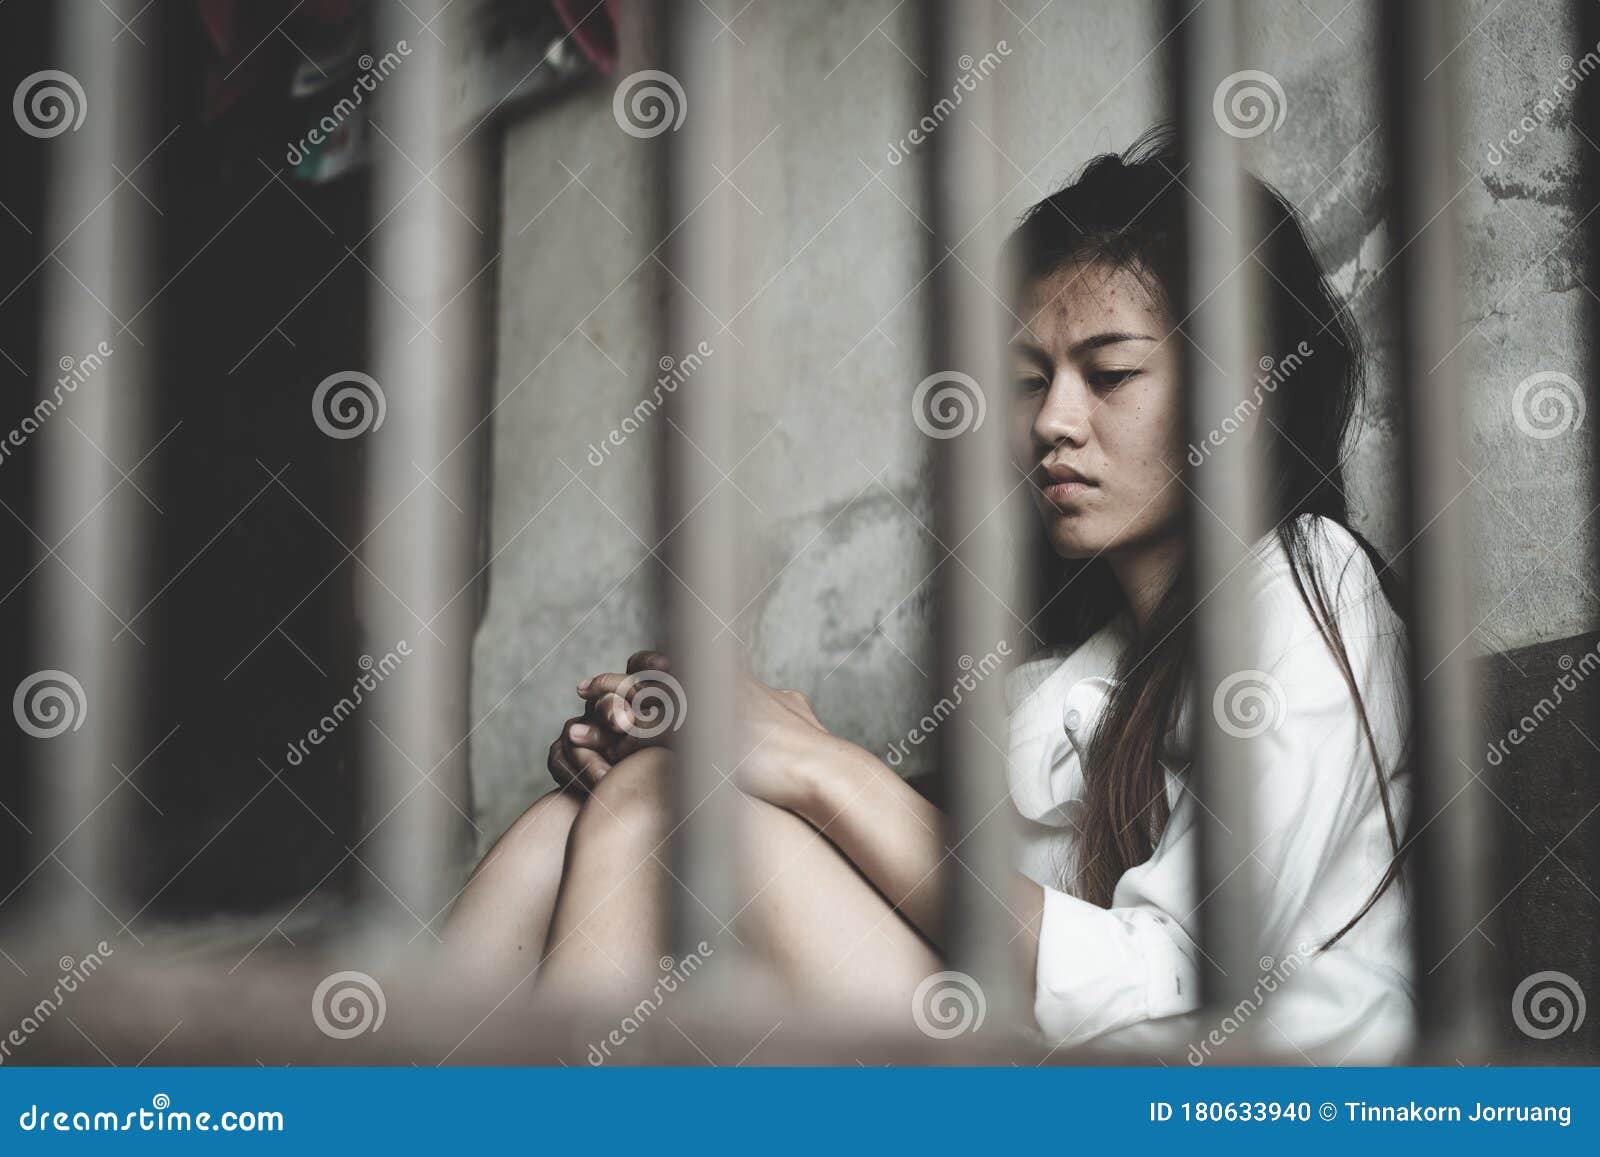 Cute Teen Slave - The Hopeless Slave Girl is in a Cell. Women Violence and Abused Concept,  Imprisonment, Female Prisoner, Human Trafficking Concept Stock Photo -  Image of adult, guilt: 180633940